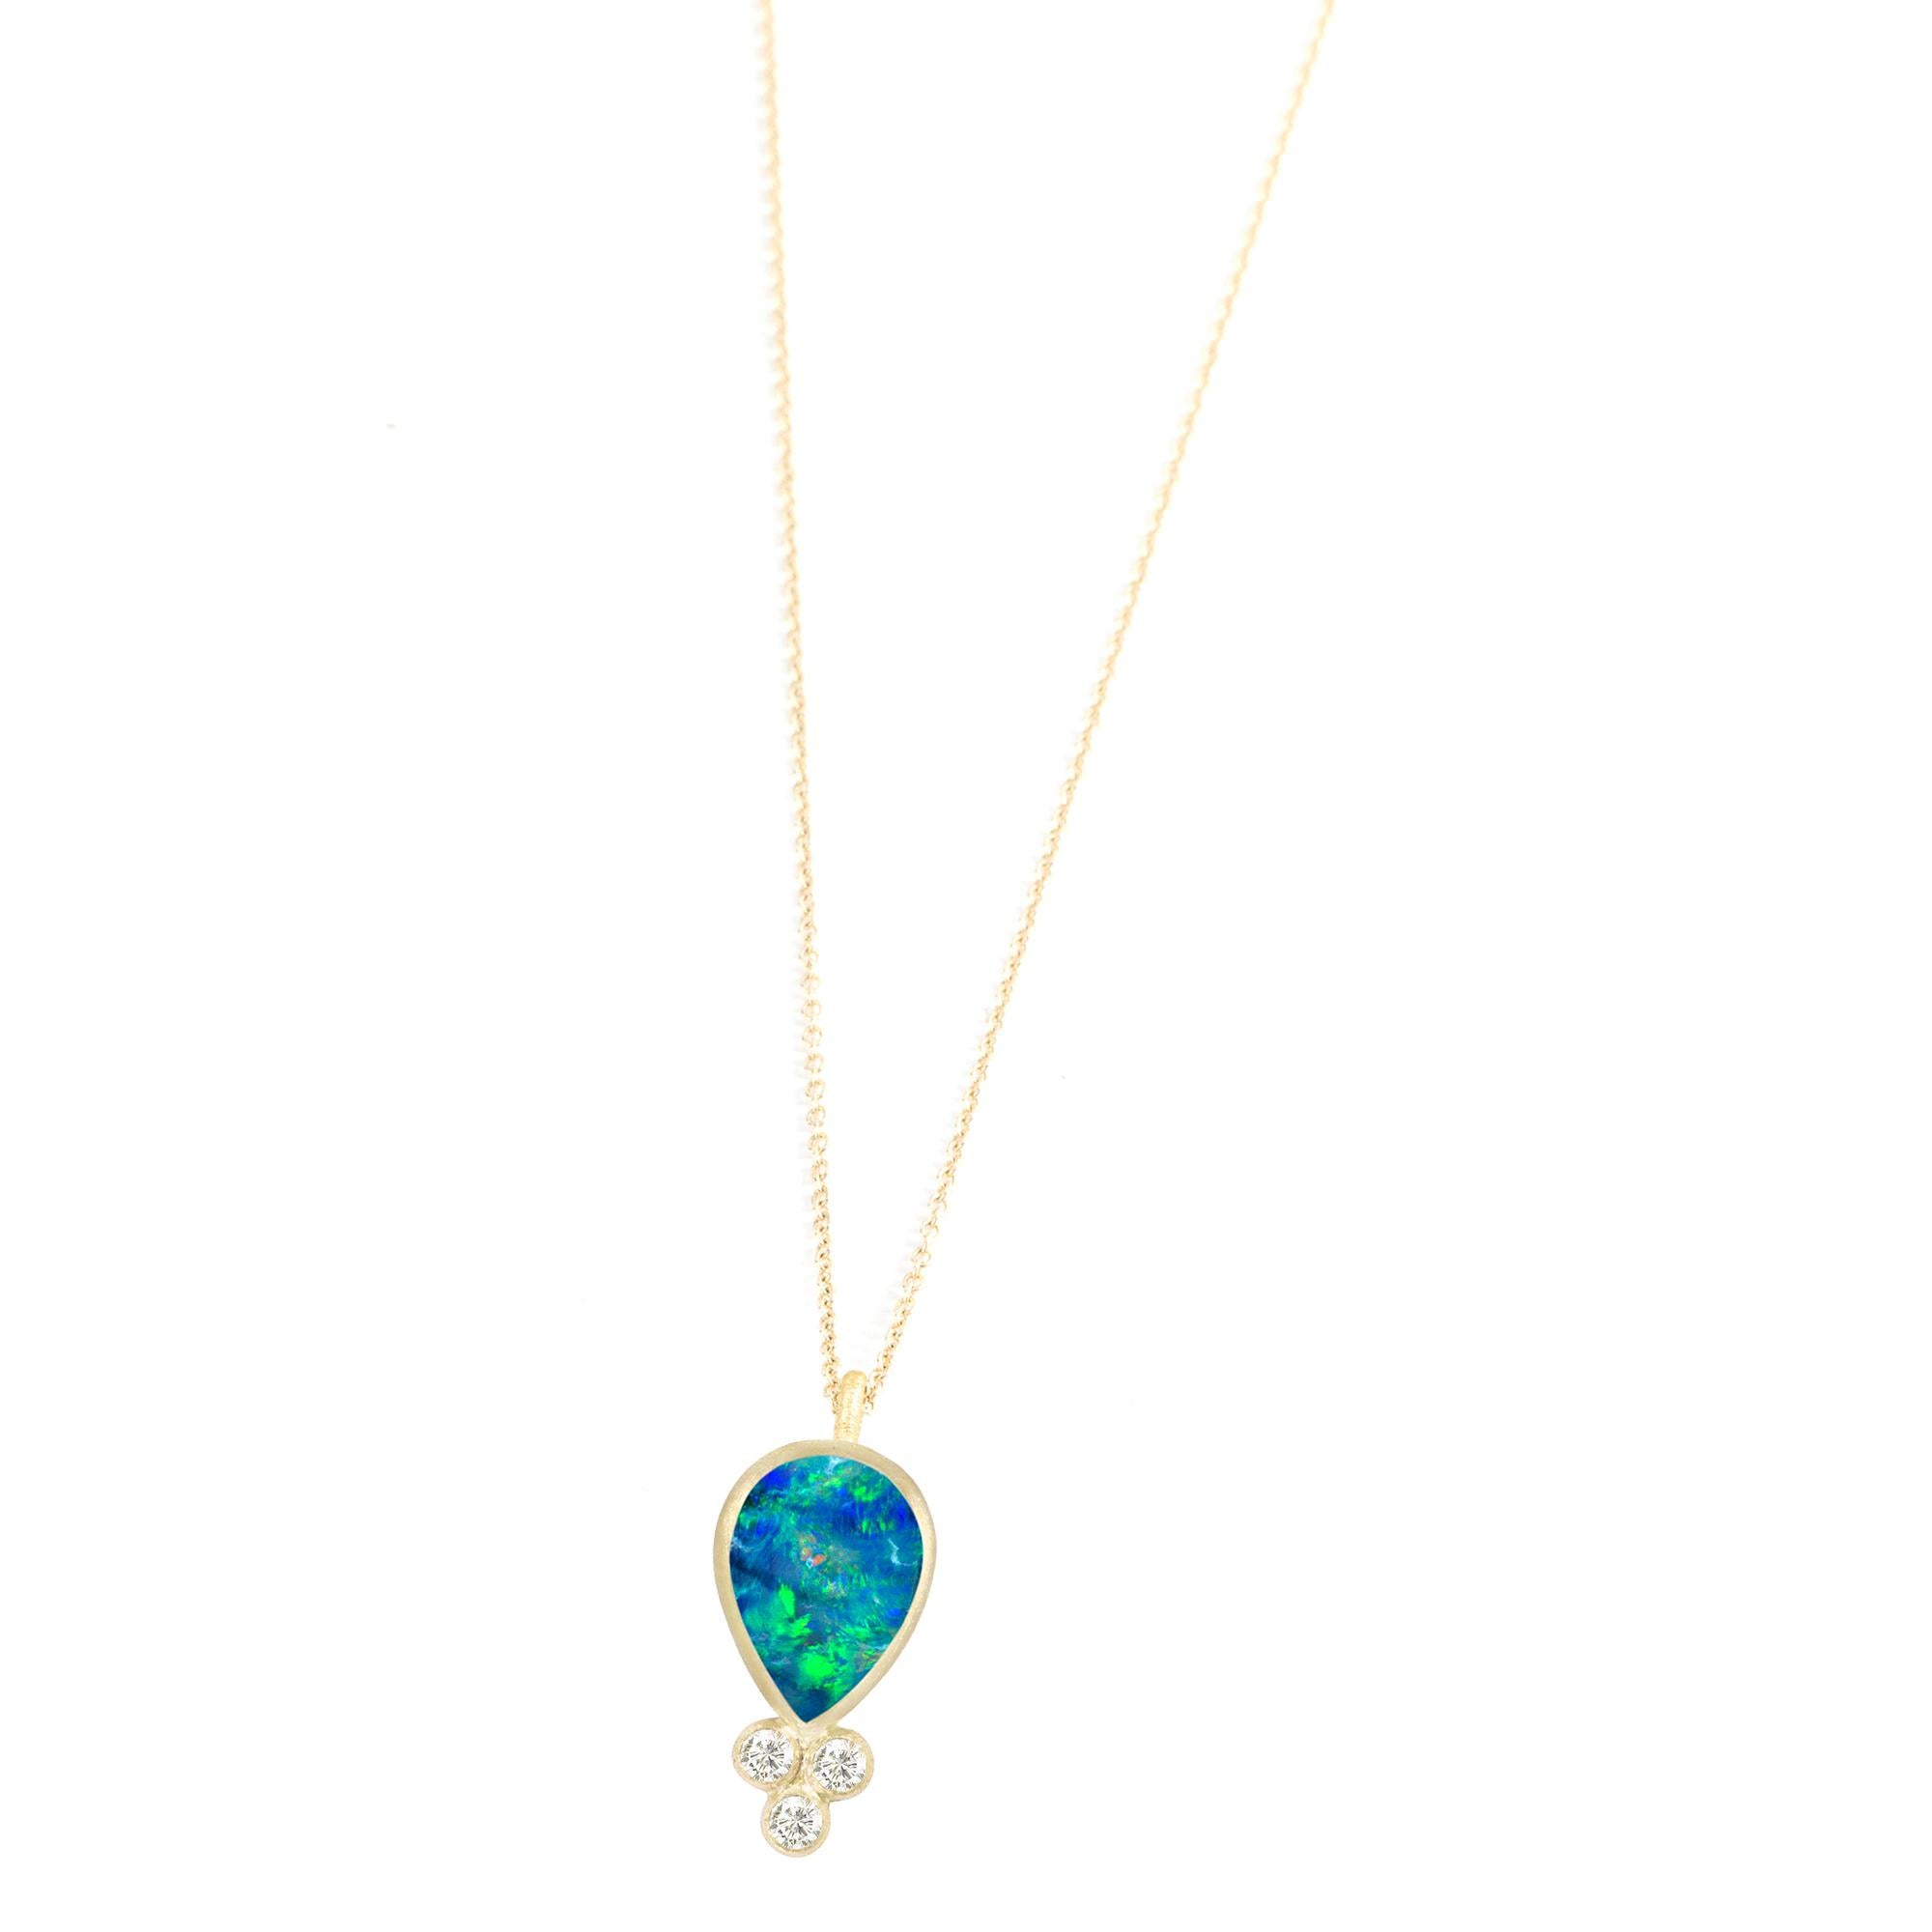 With its single, bezel-set opal doublet, the diamond-accented Lilly Gold Necklace is clean and elegant, and a very feminine style you can wear day in, day out.

Metal: 18K Yellow Gold
Stone carat: 1
Diamond carat: 0.0225
Length: 16-18''
Stone size: